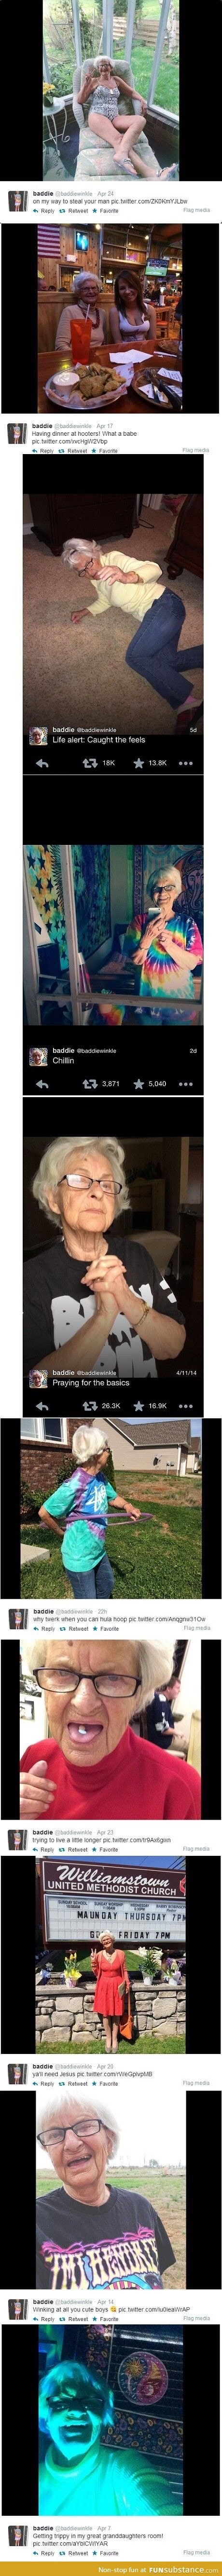 This grandma is cooler than me.